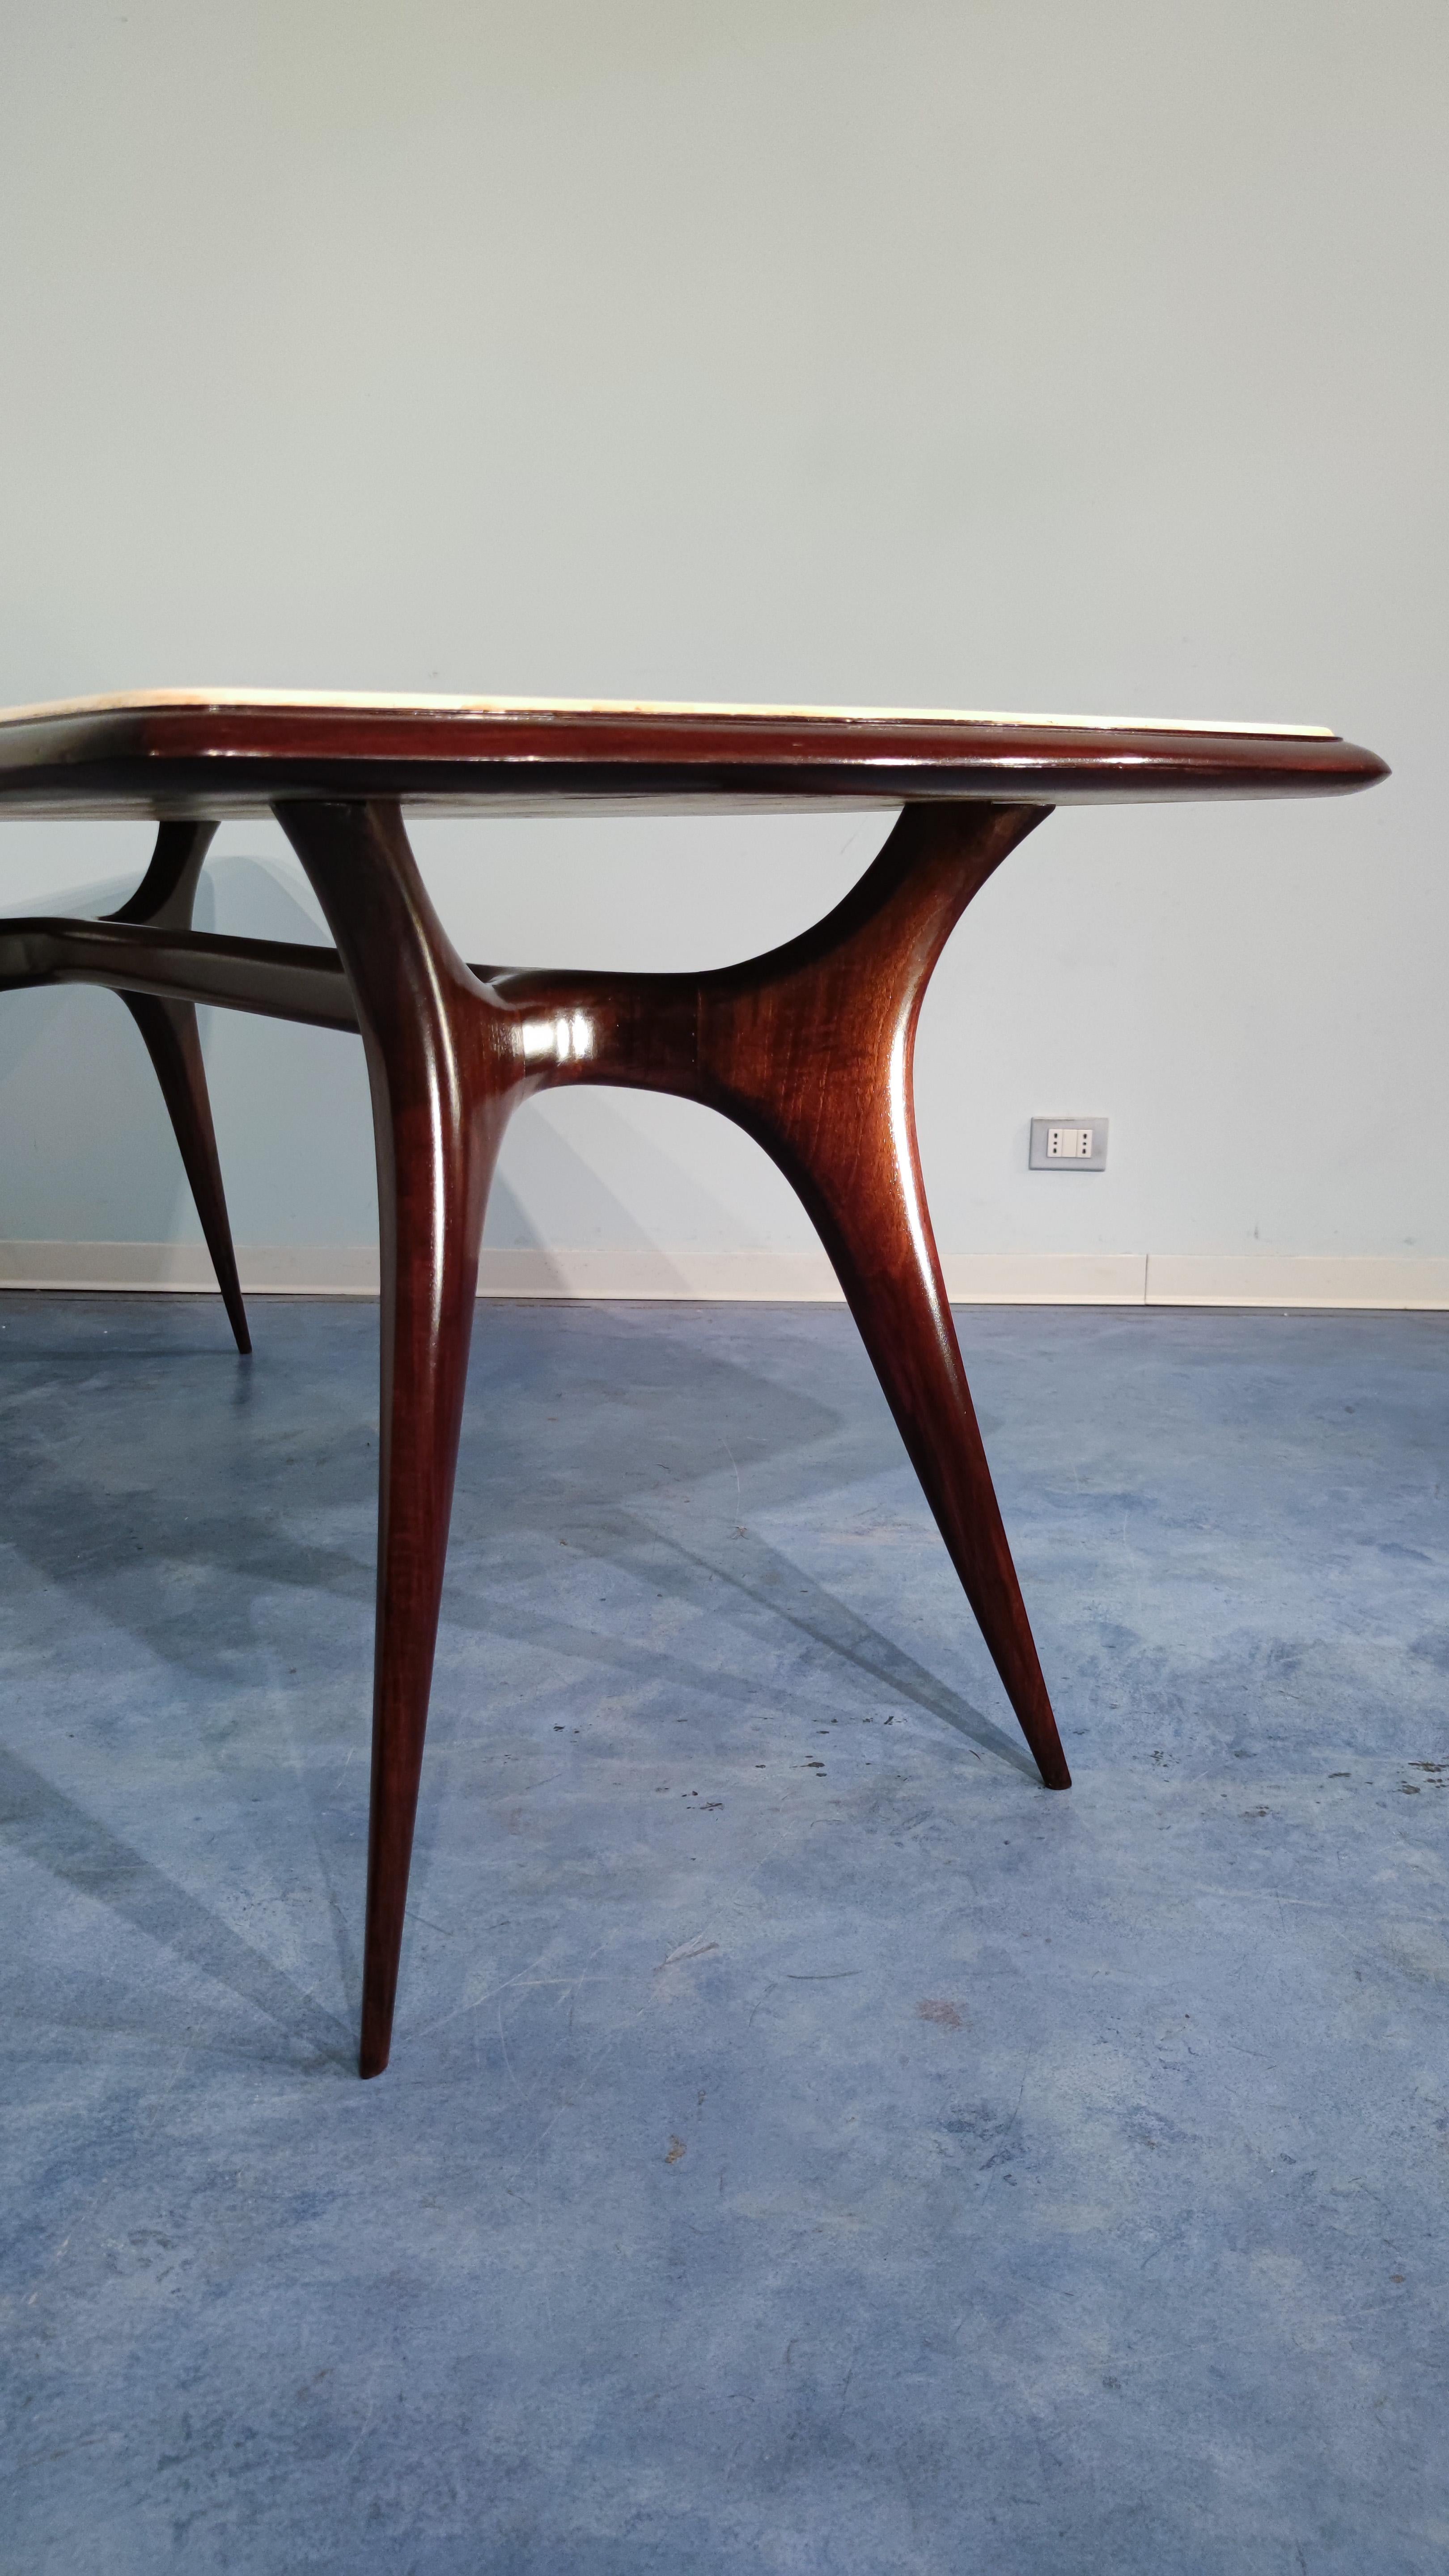 Italian Mid-Century Parchment Dining Table Attributed to Guglielmo Ulrich, 1950s For Sale 1